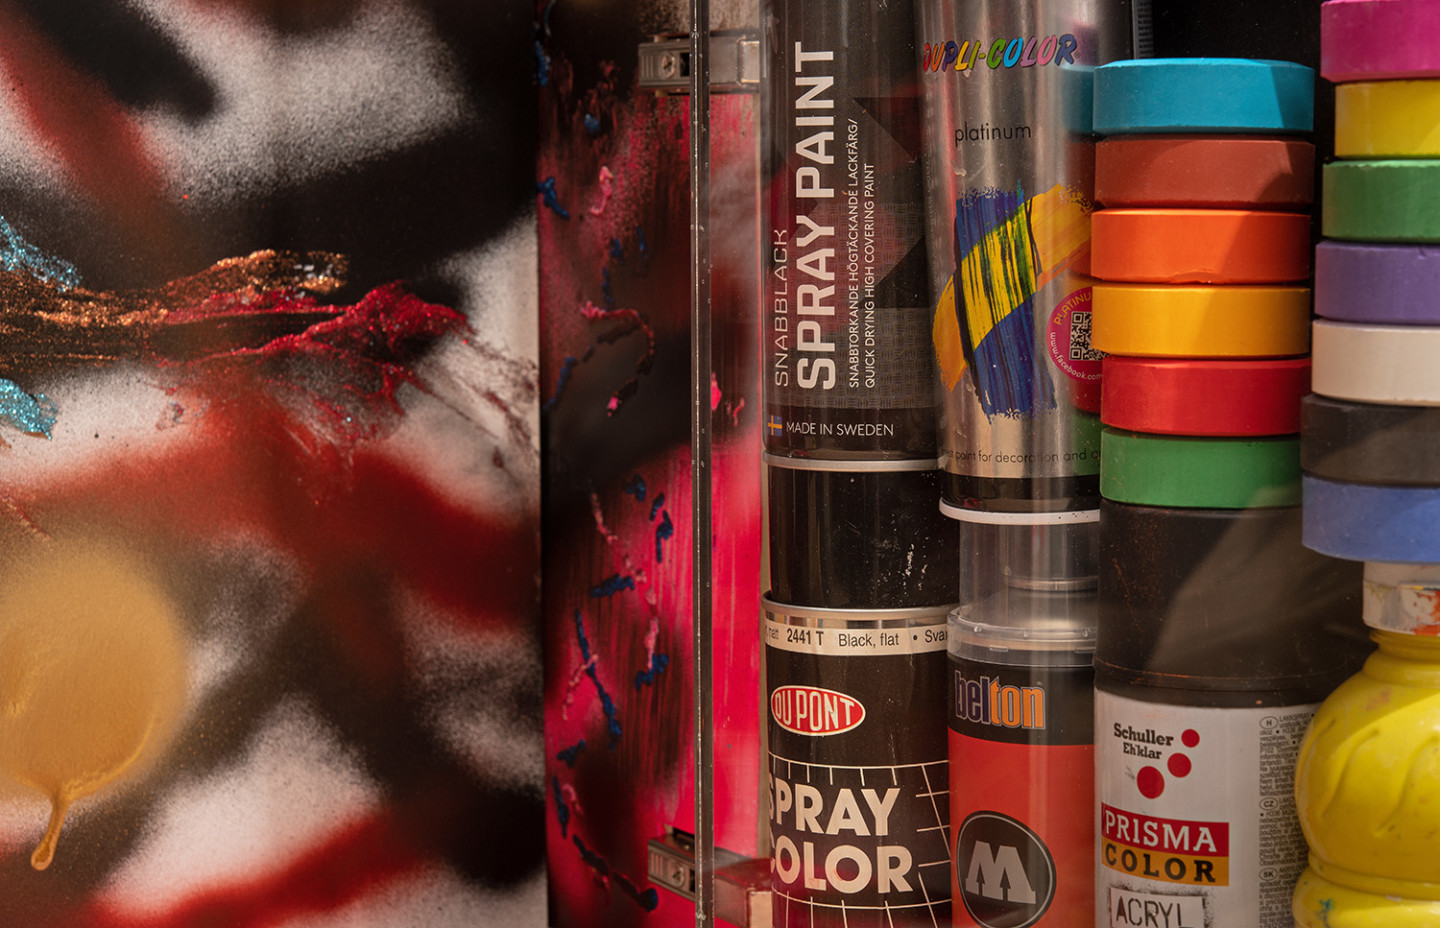 Stacks of cans of spray paint and lacquer paint.